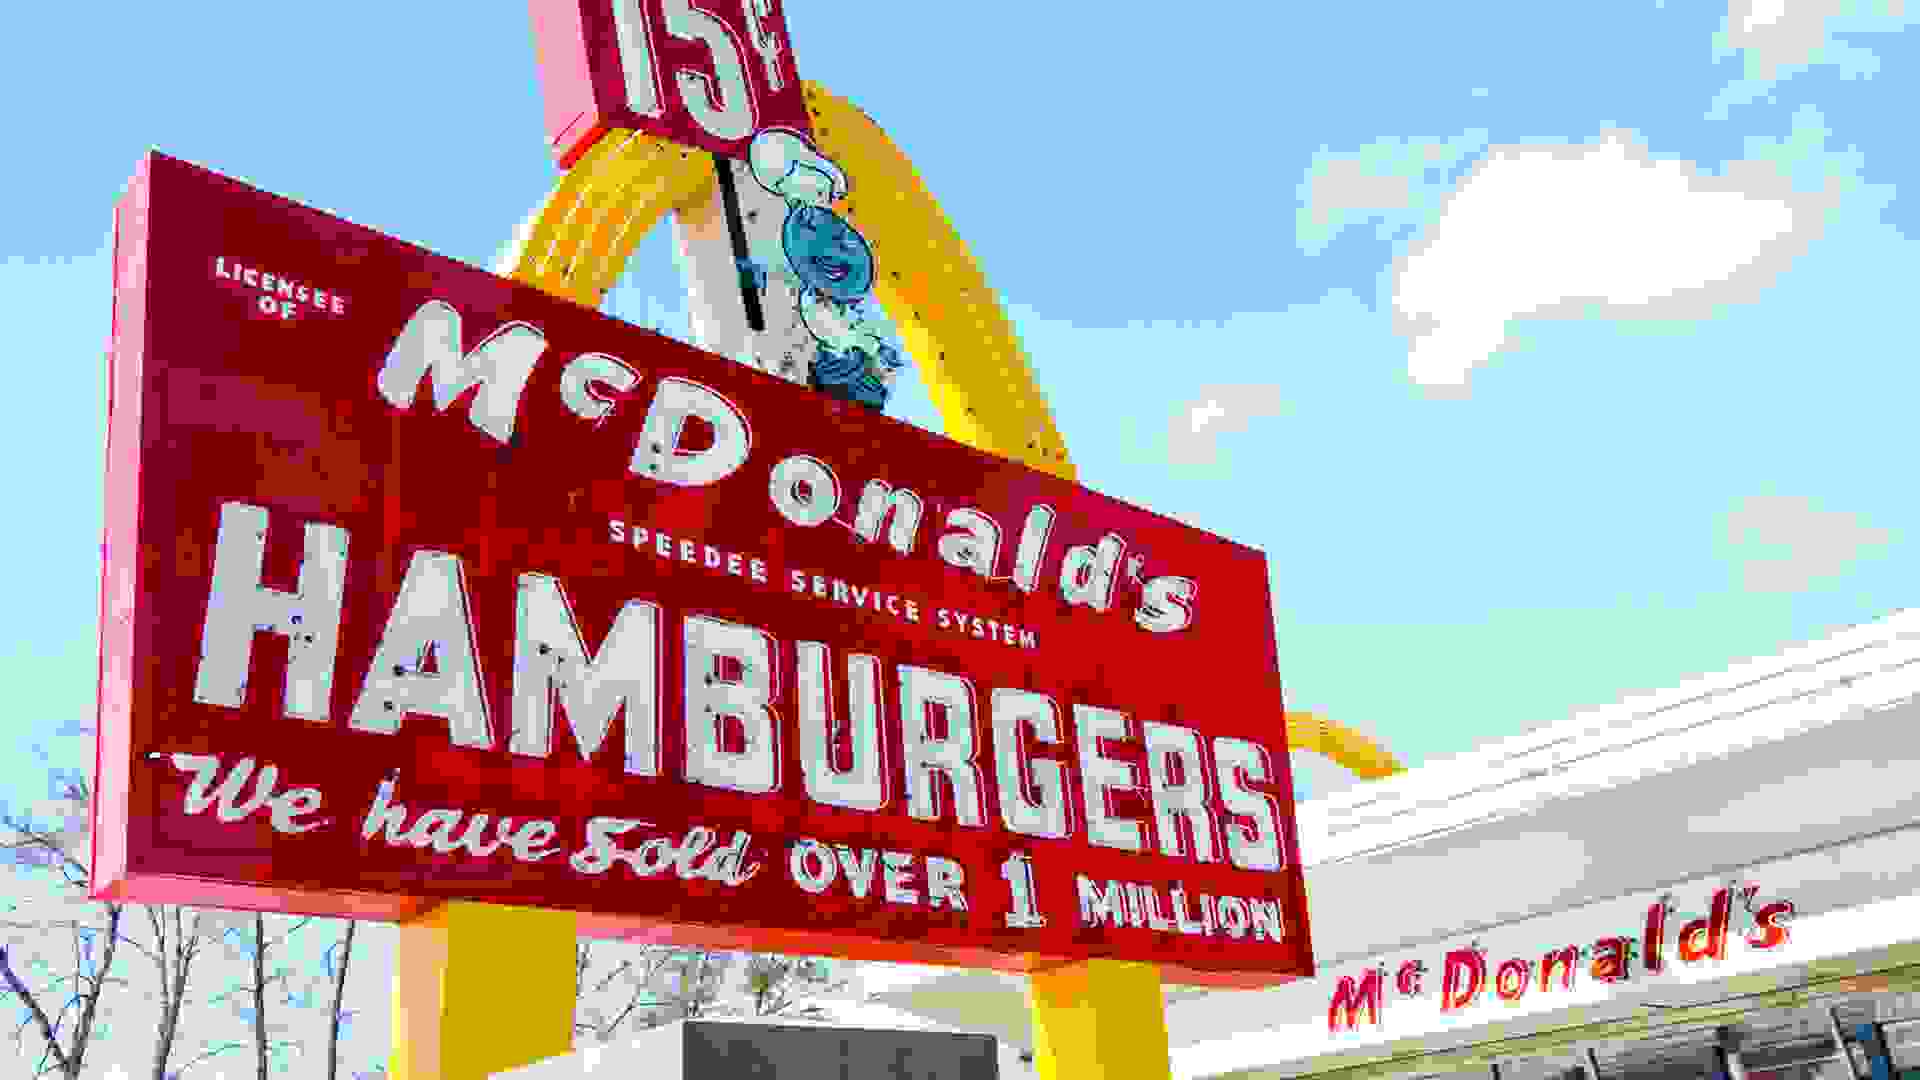 Des Plaines, IL, USA - May 4, 2011: Original McDonald's franchise, opened by Ray Kroc on April 15, 1955.